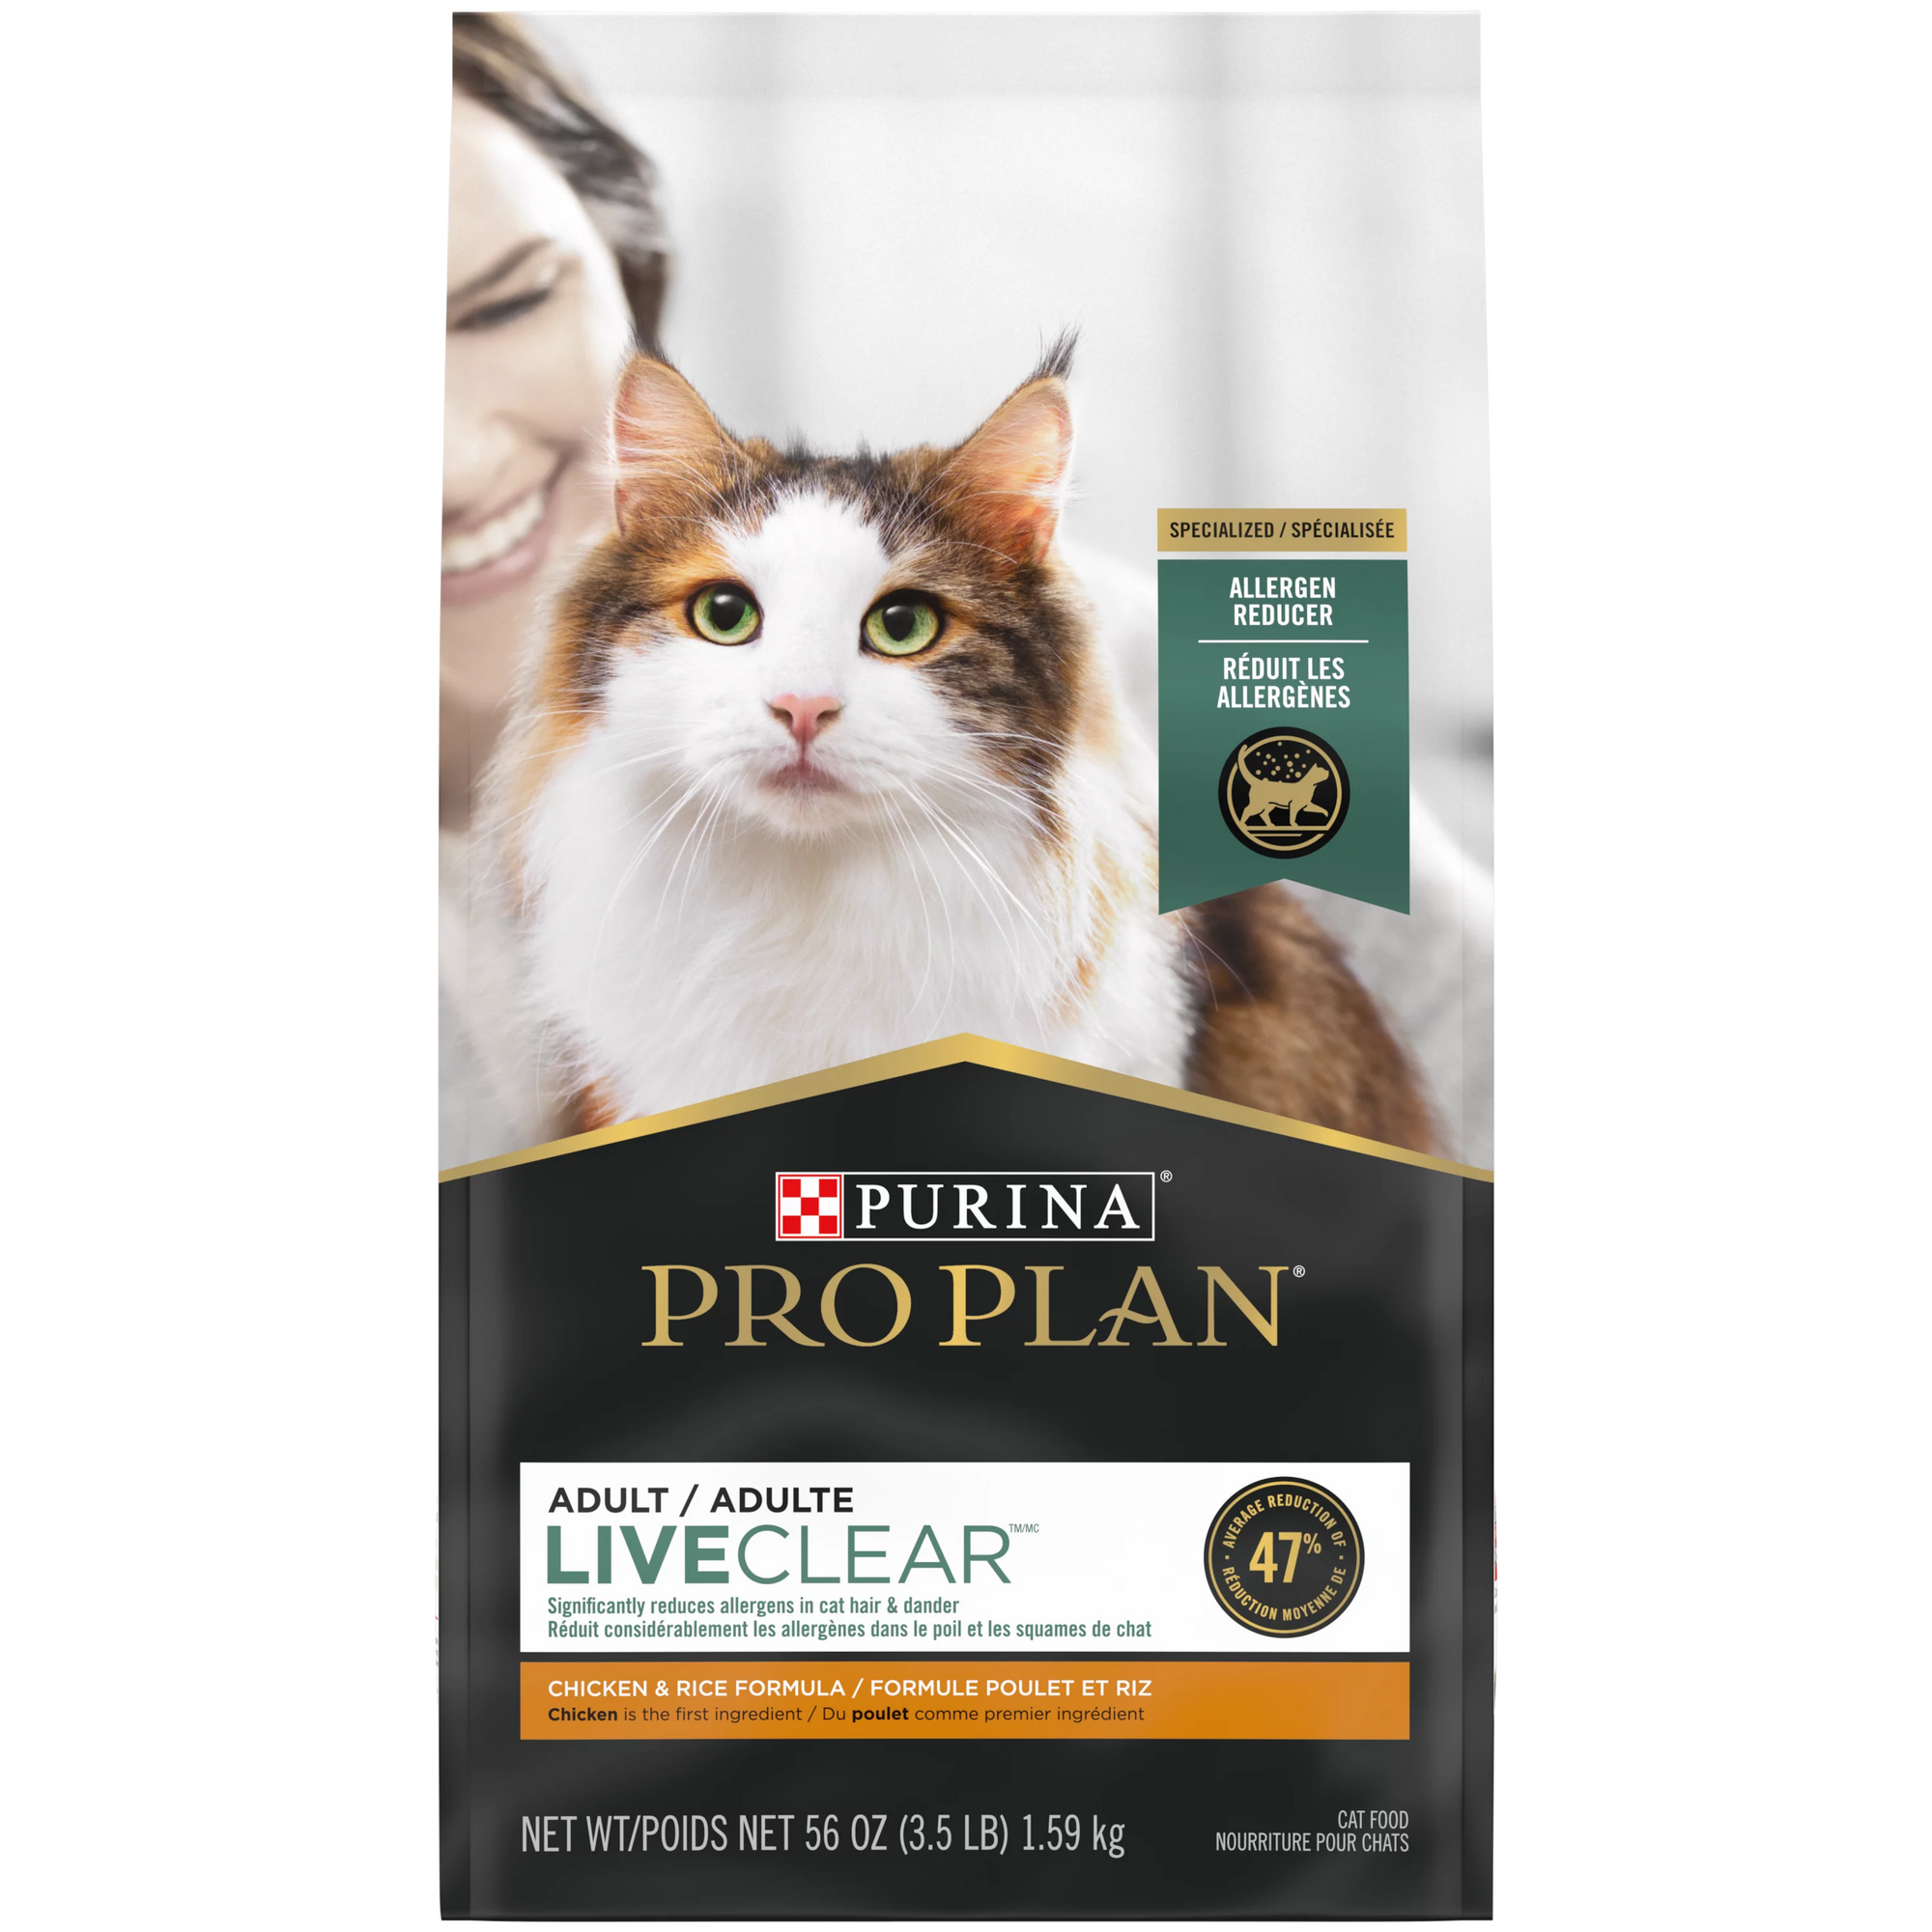 Pro Plan® LiveClear Allergen Reducing Chicken & Rice Formula Dry Cat Food 7 lb (3.18 kg)